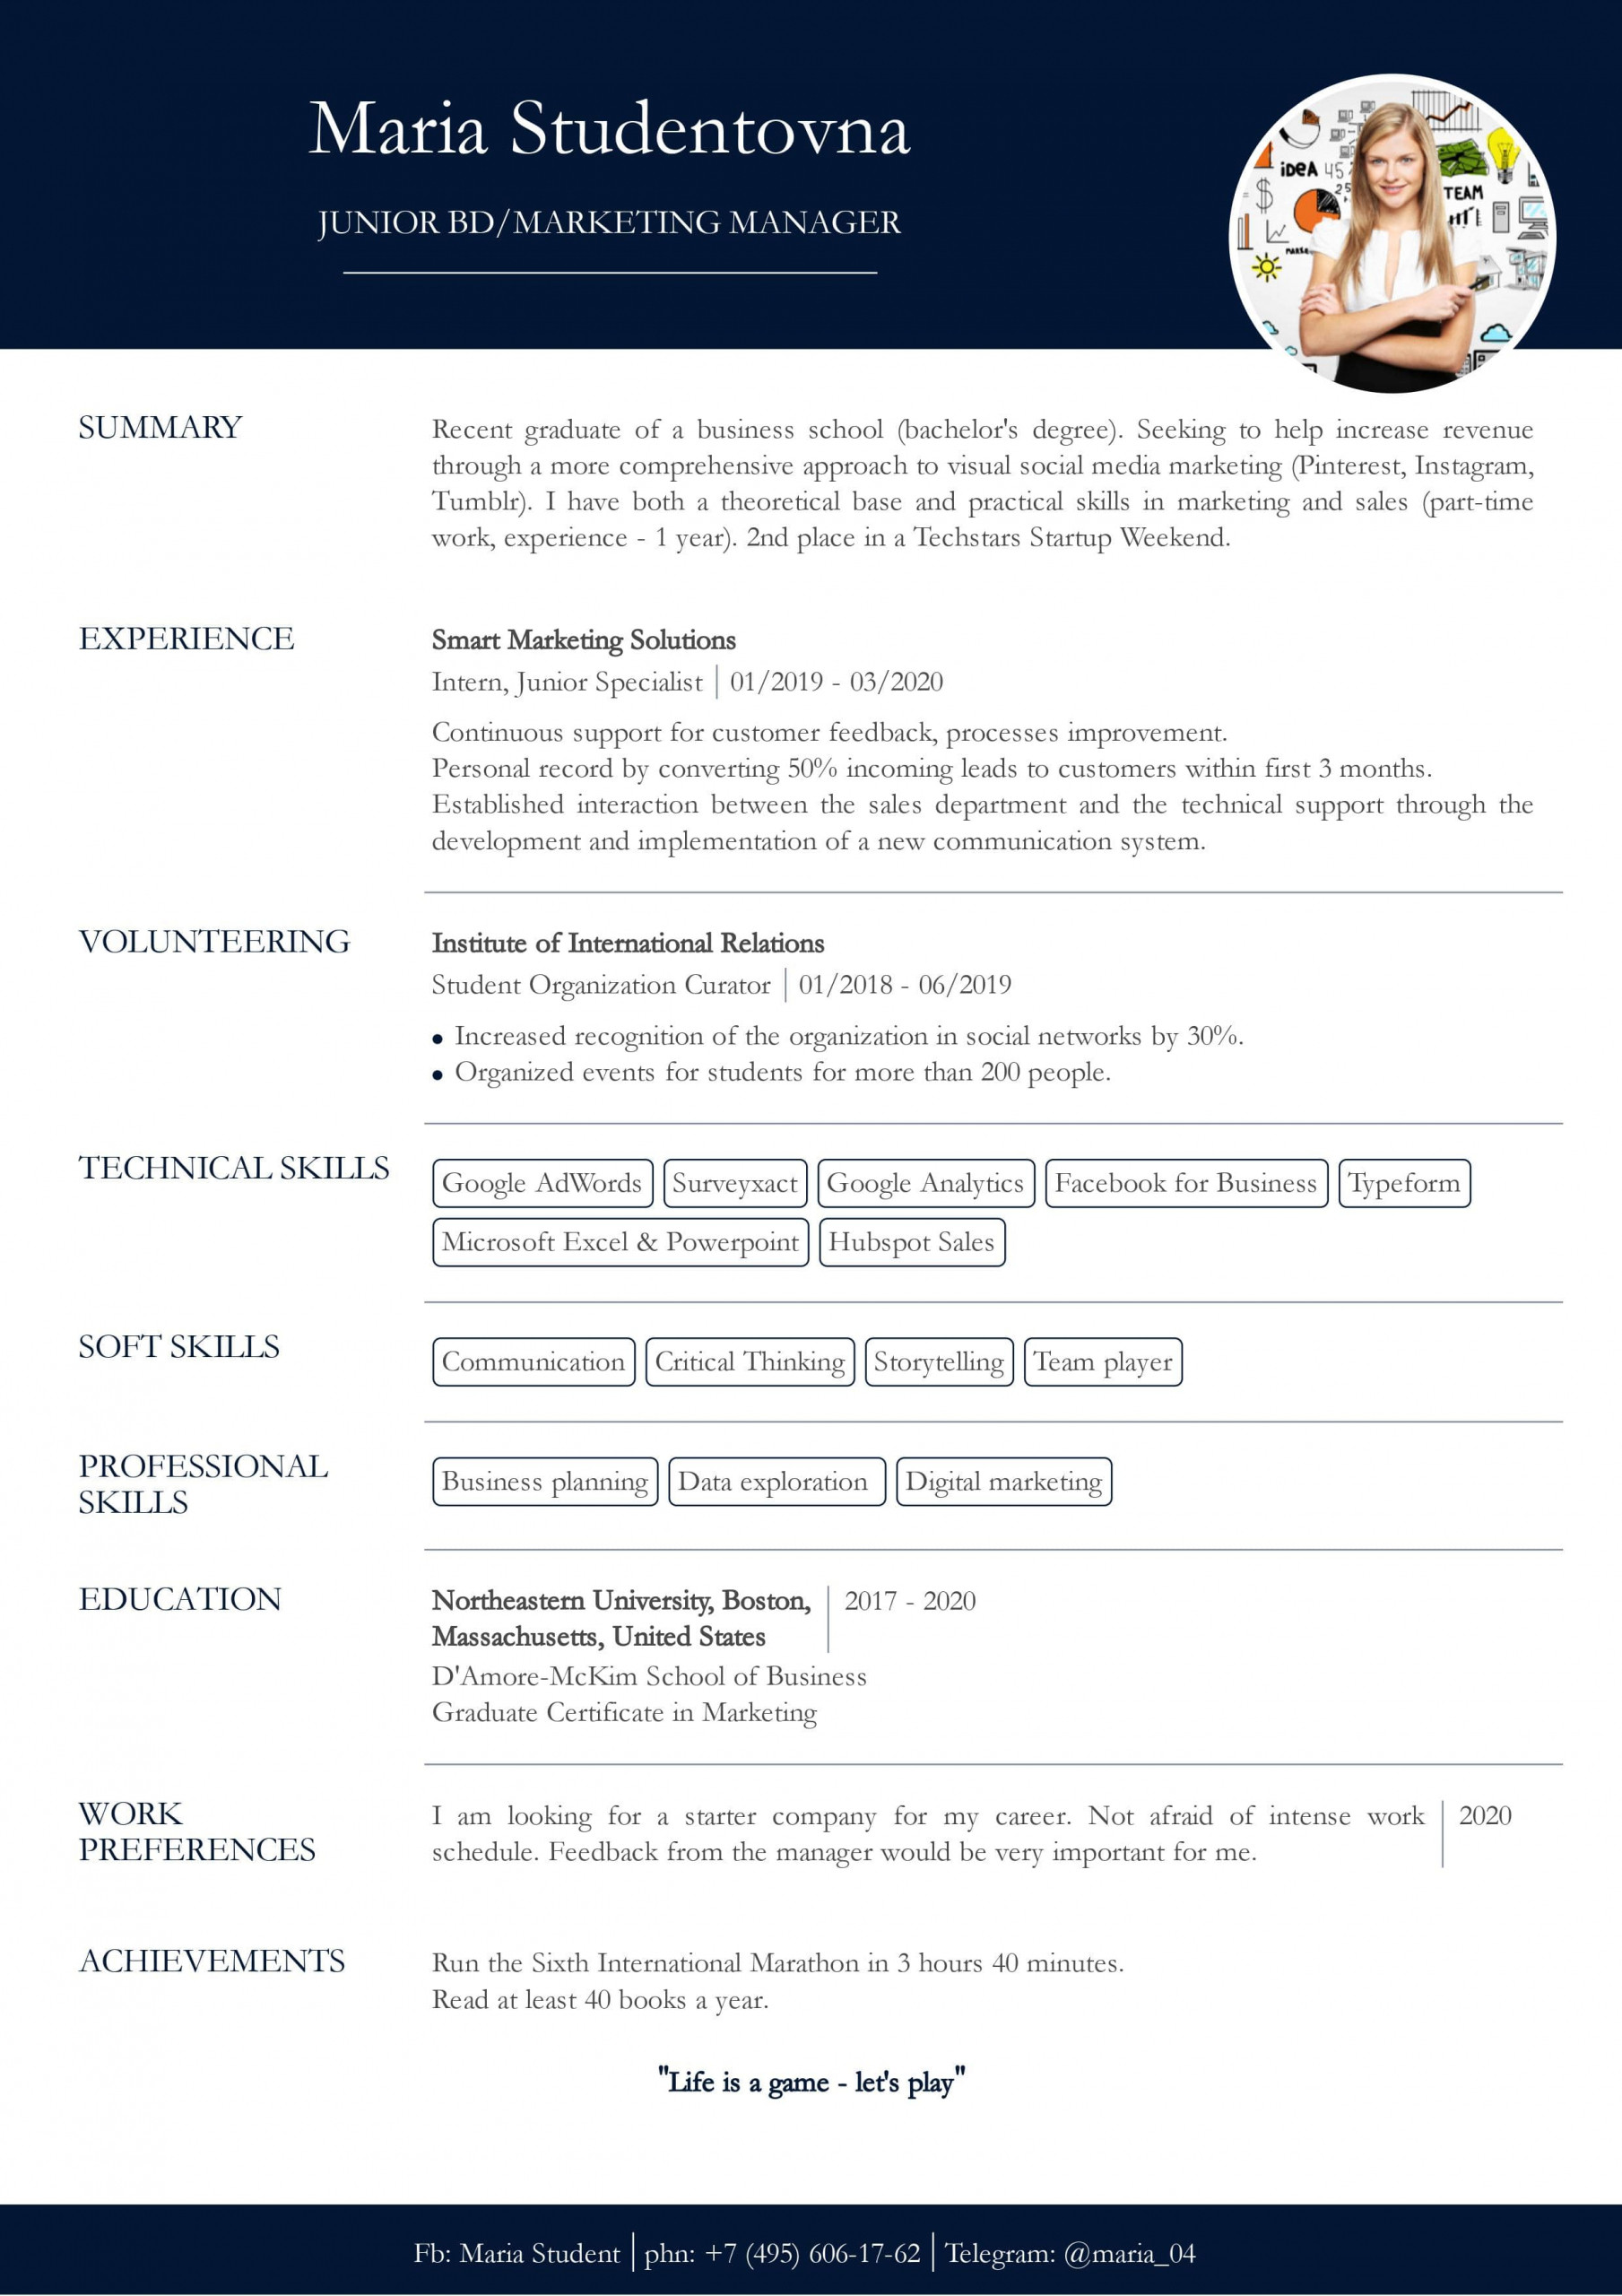 Resume Template if You Have No Experience Resume with No Work Experience. Sample for Students. – Cv2you Blog